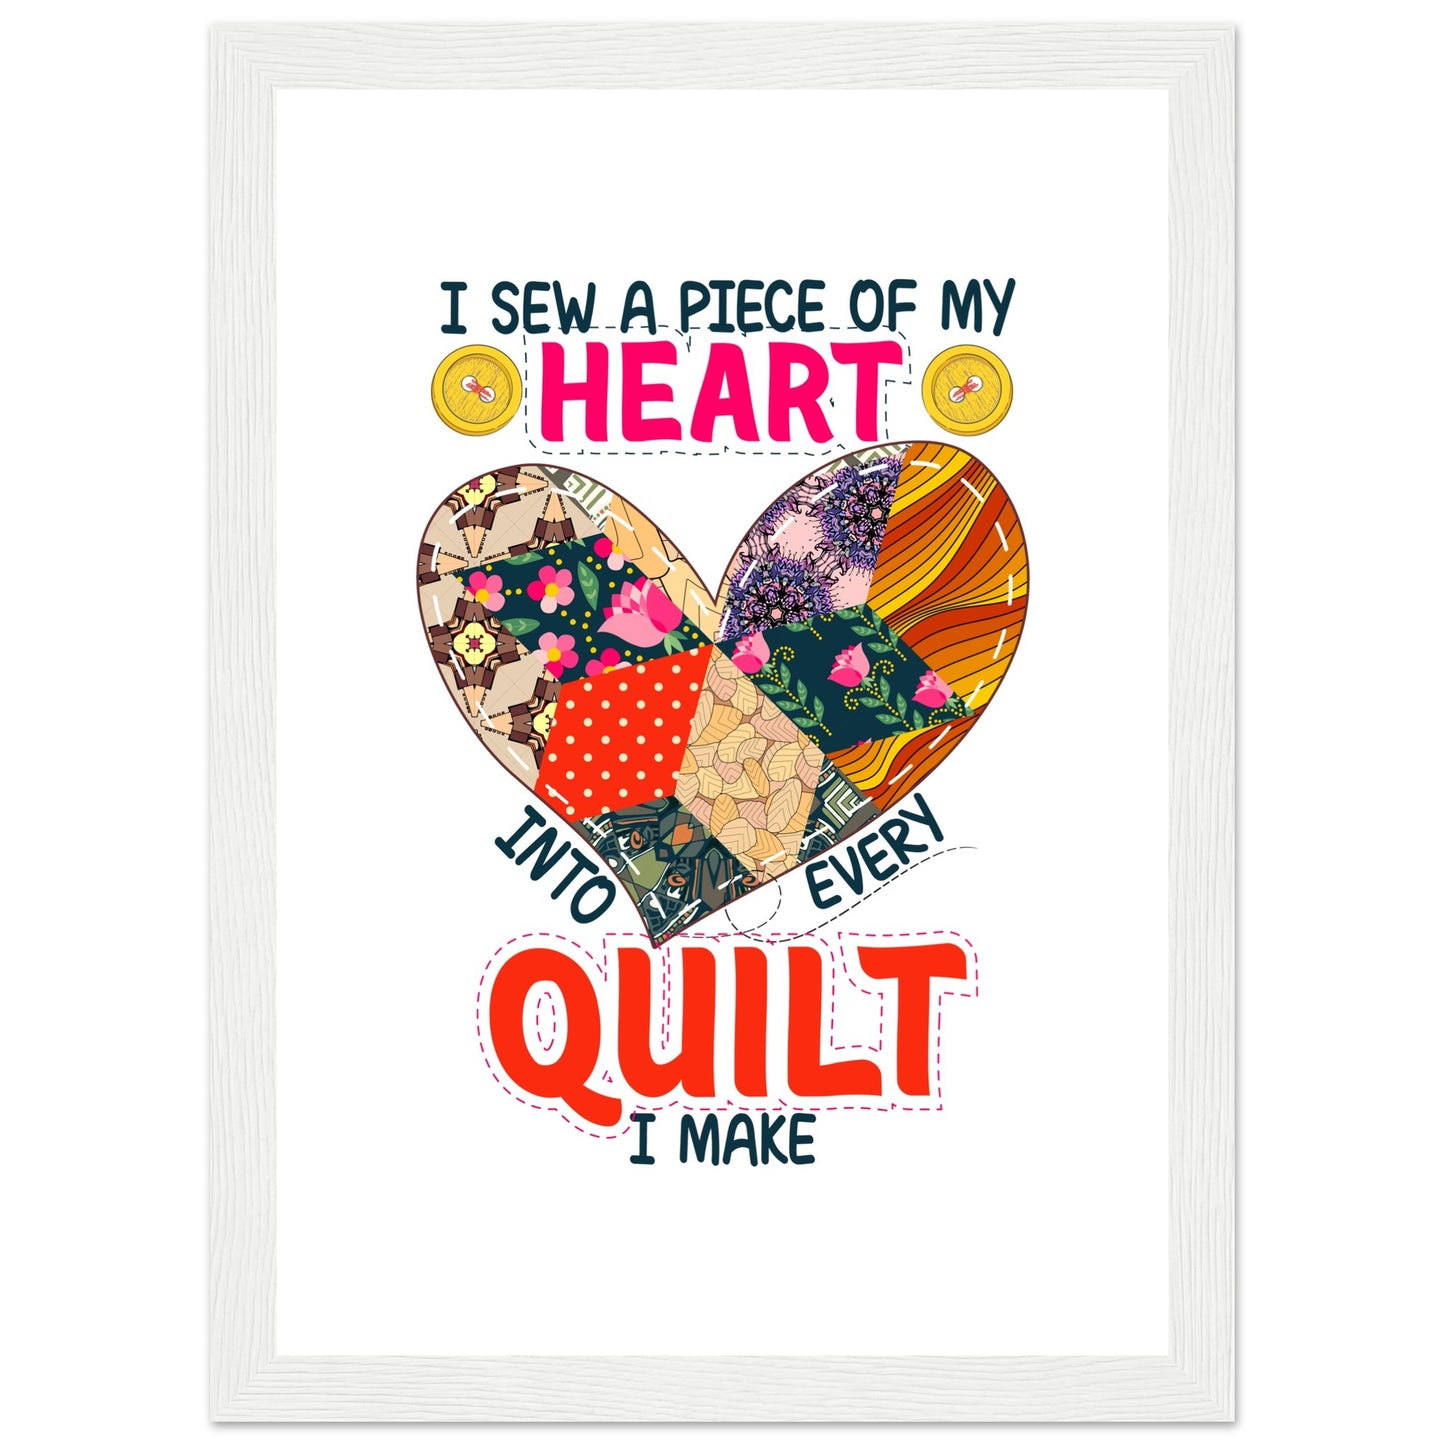 I Sew a Piece of My Heart Into Every Quilt I Make - Quilting Wall Art - Premium Matte Paper Wooden Framed Poster